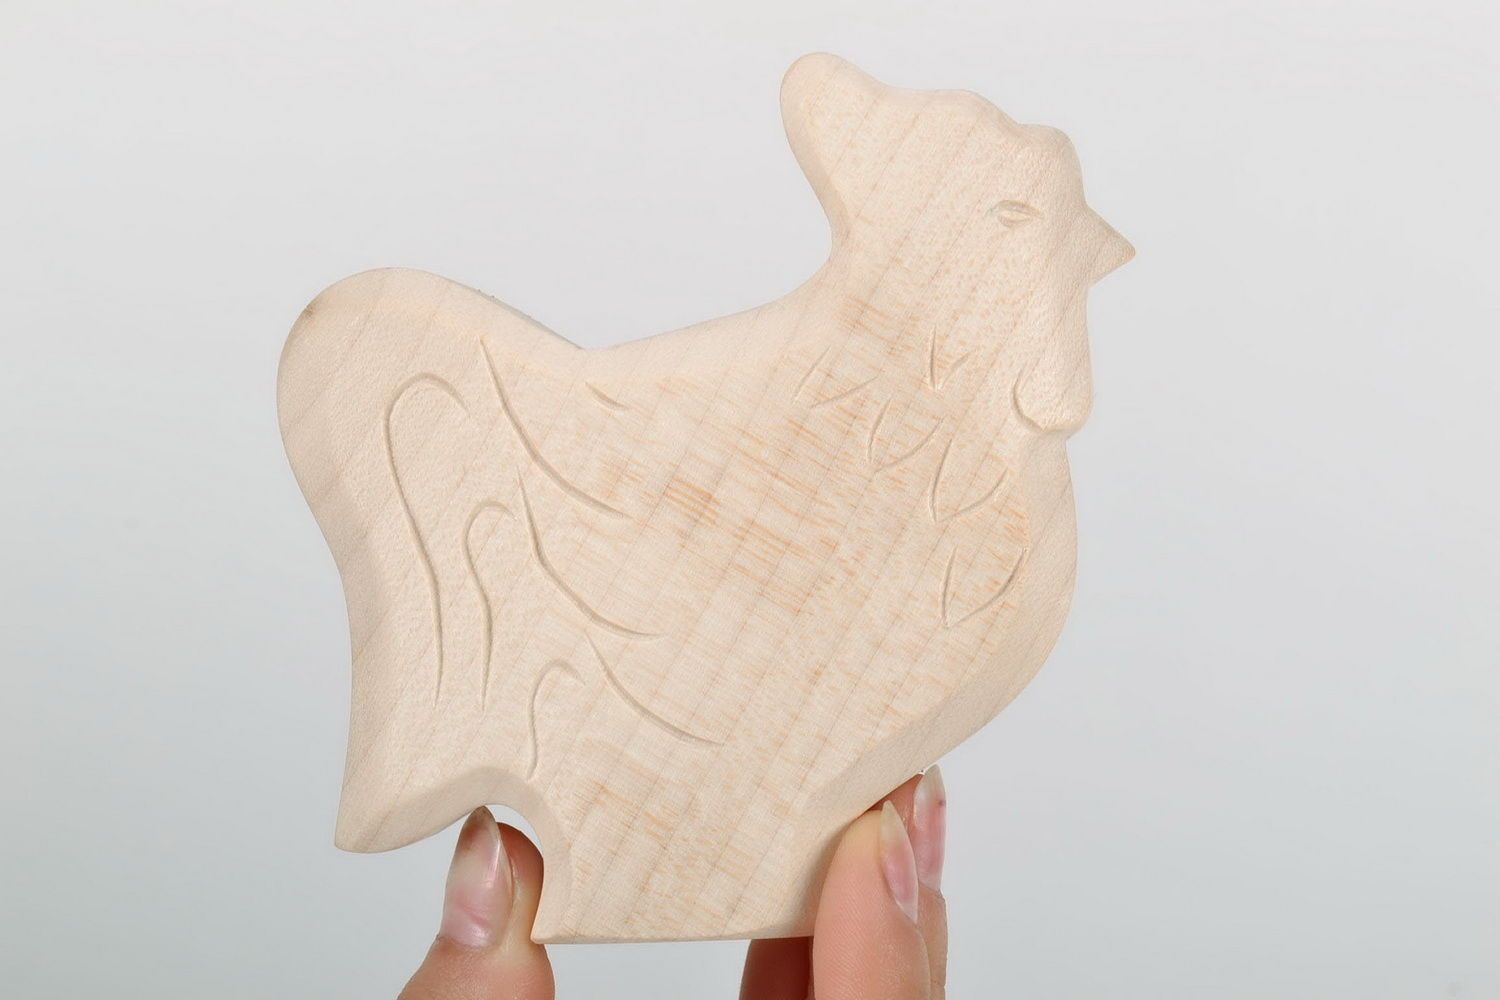 Figurine made from maple wood Cock photo 2